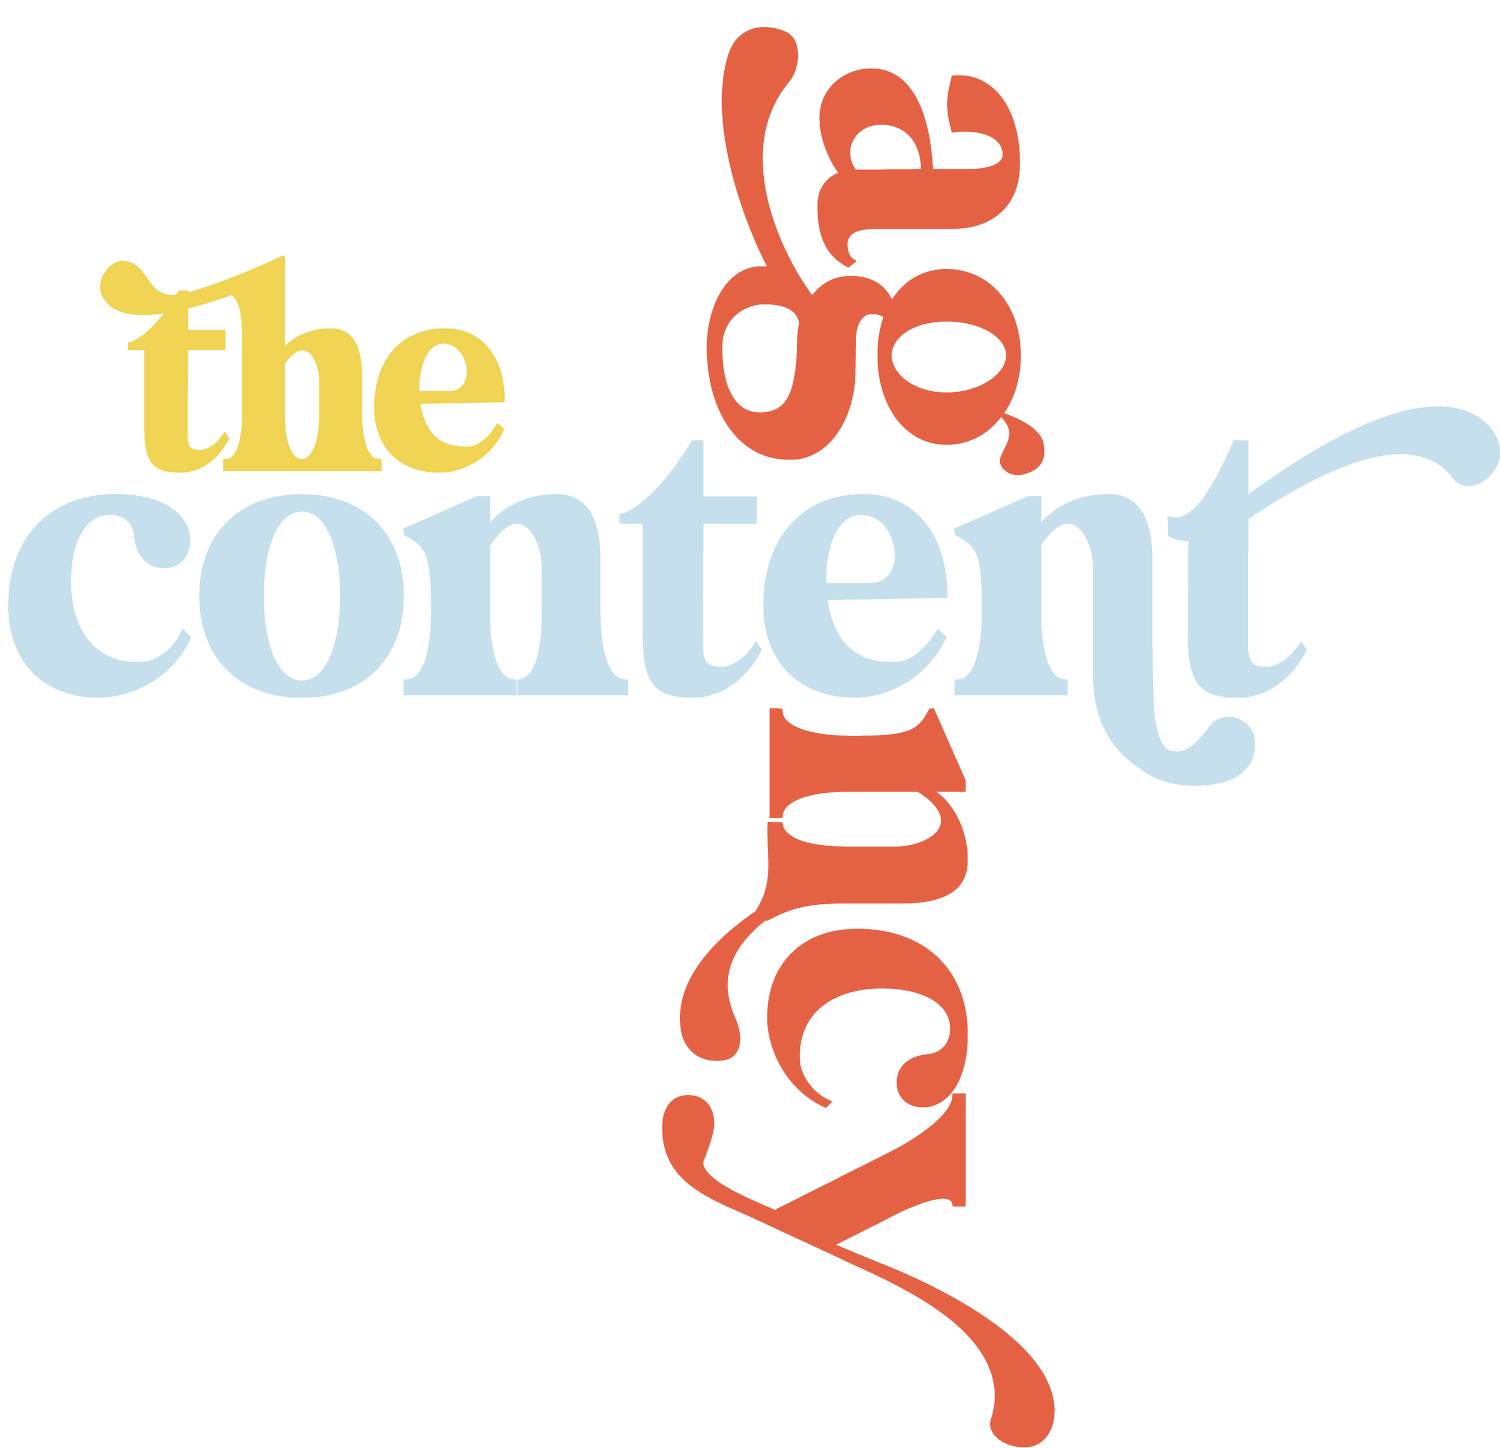 The Content Agency